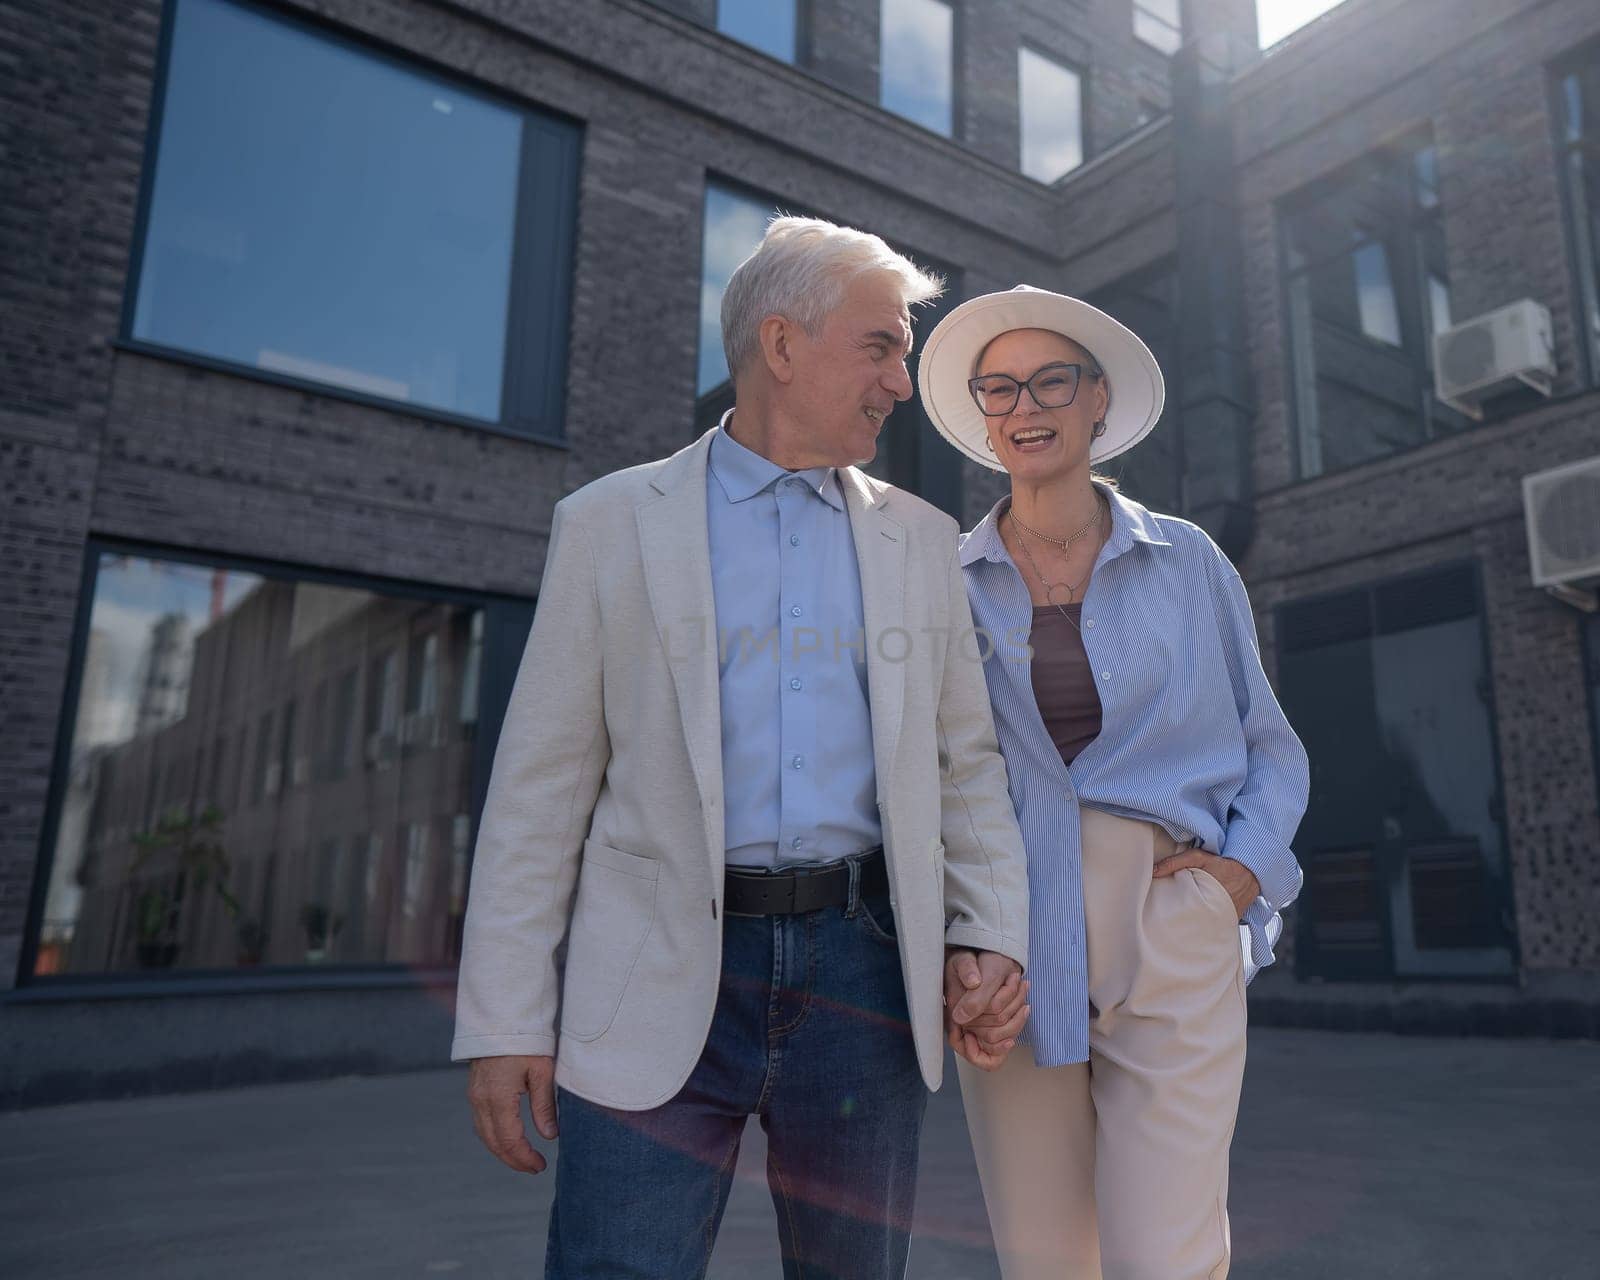 An elderly couple in love walks through the city. by mrwed54